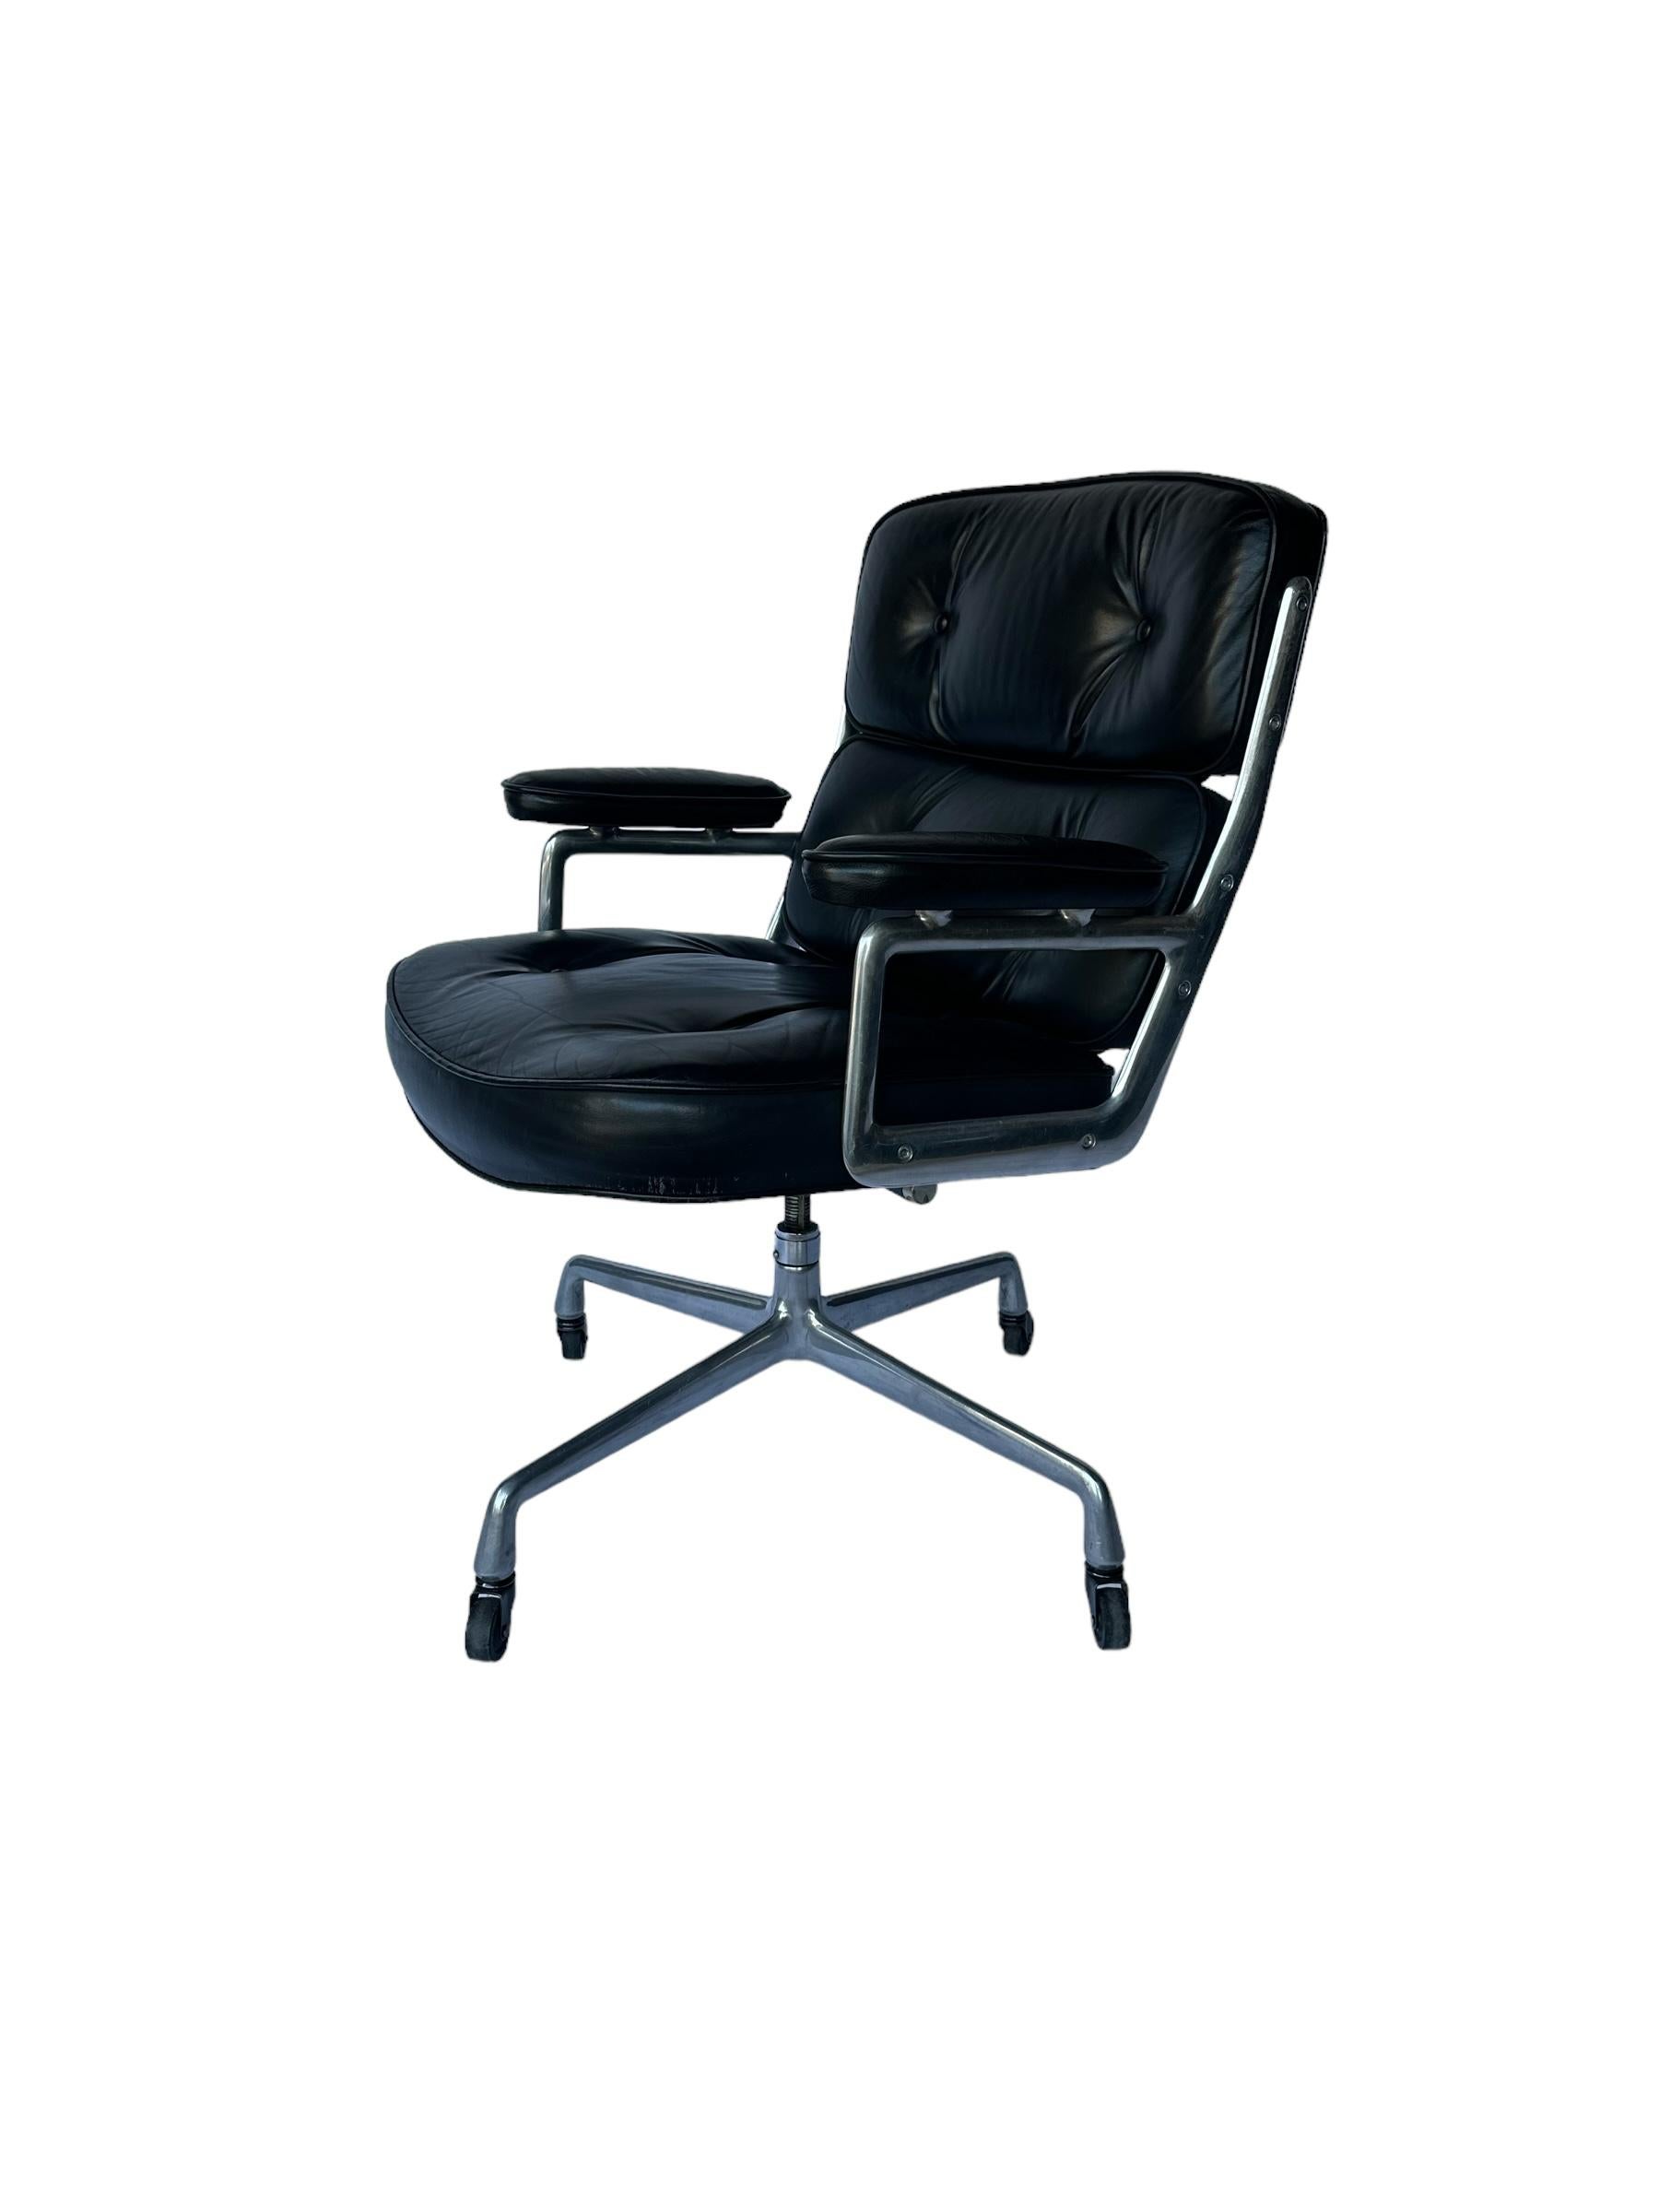 Eames Time Life Office Desk Chair in Black Leather In Good Condition For Sale In Brooklyn, NY